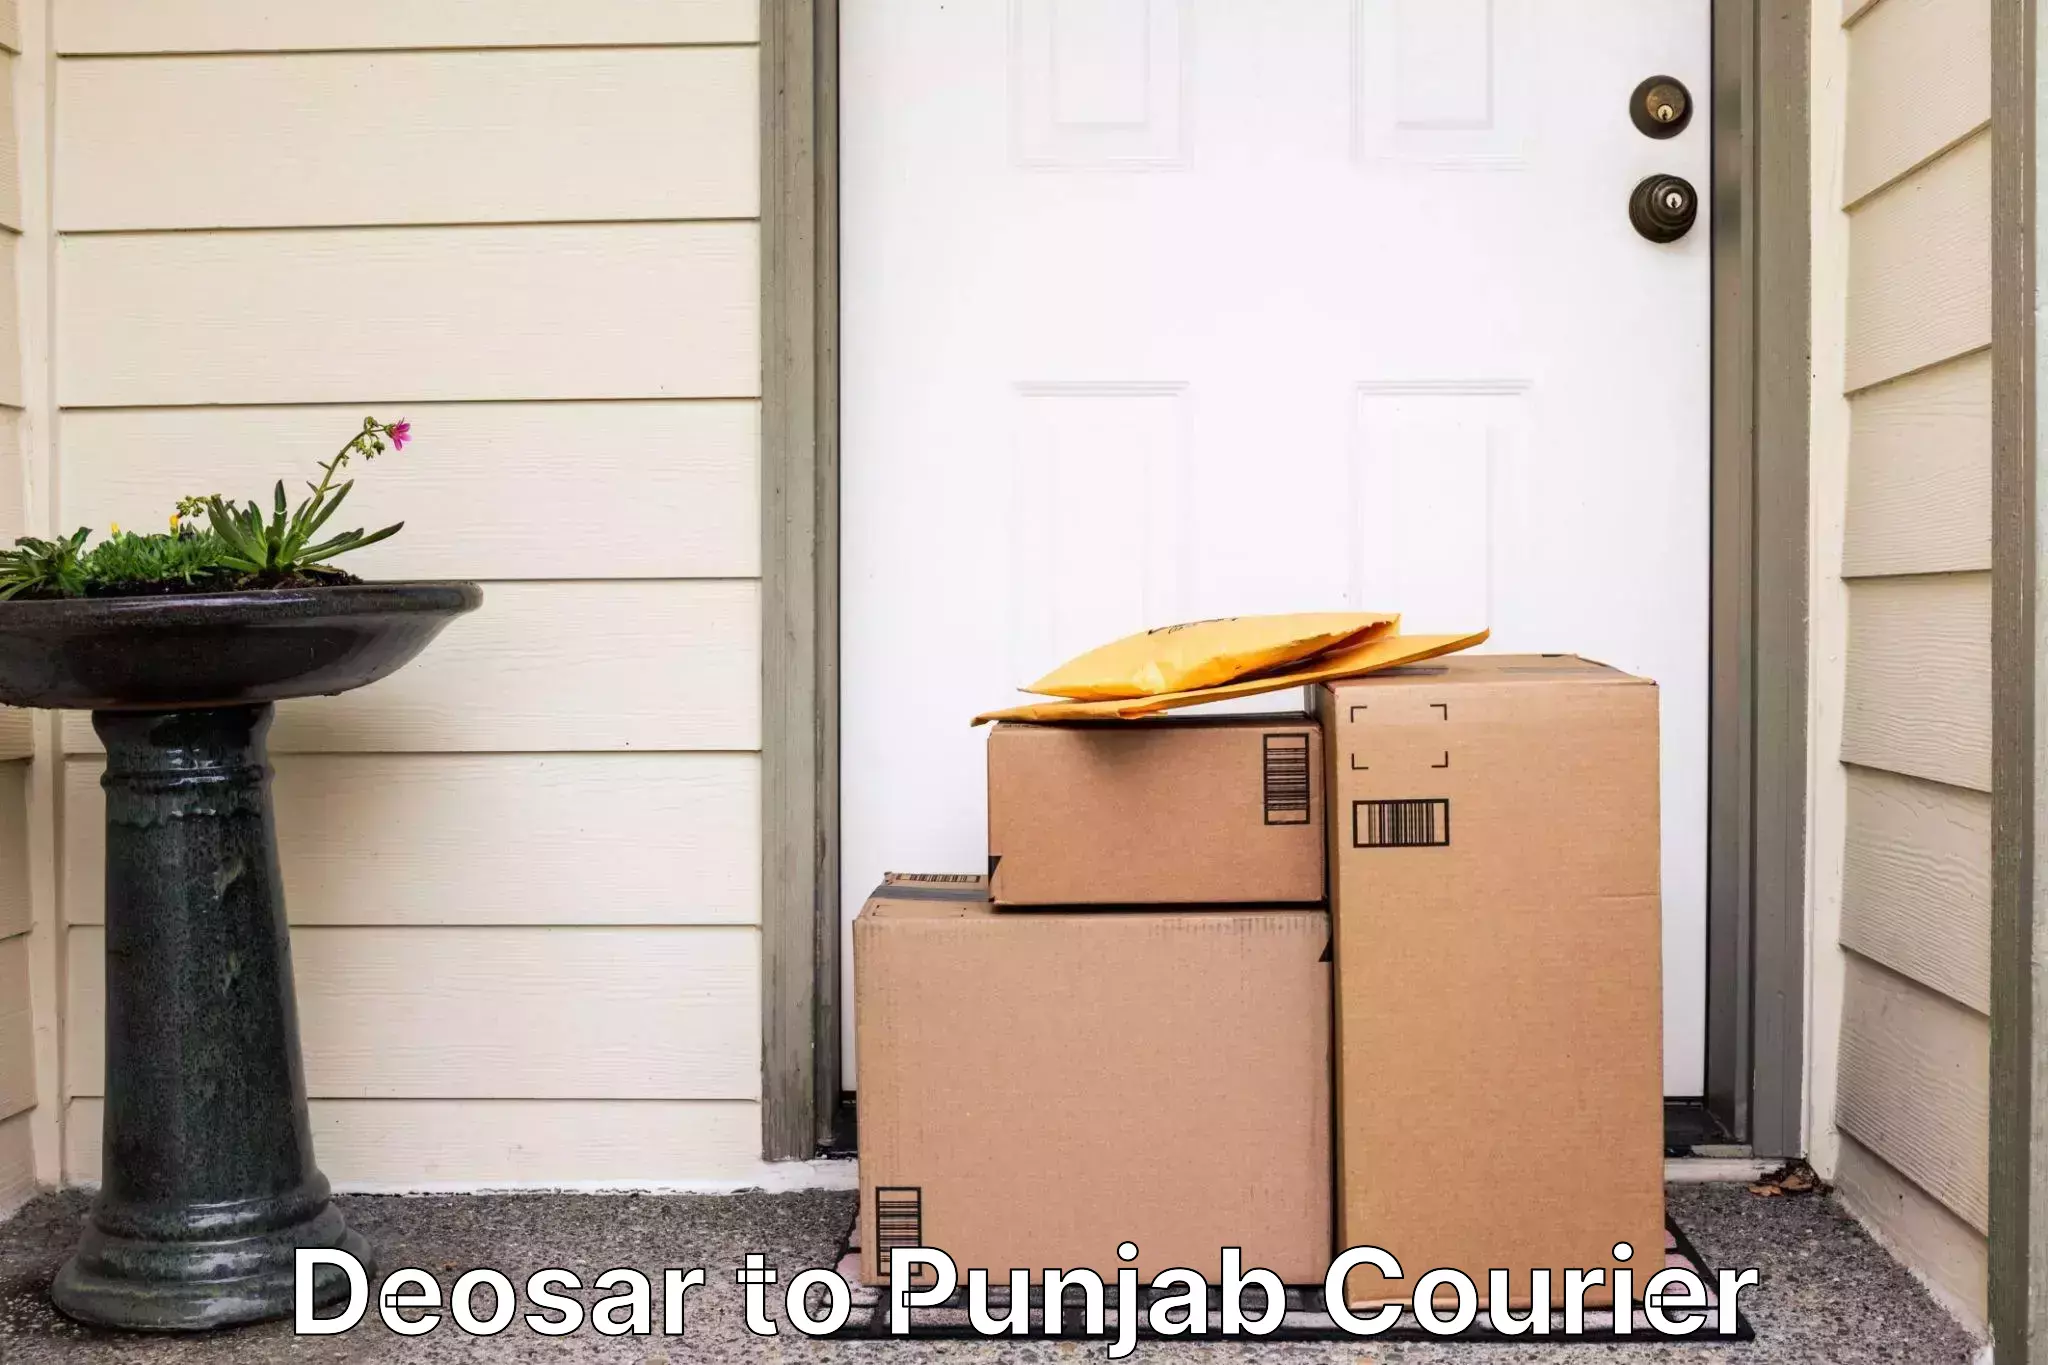 On-demand courier Deosar to Punjab